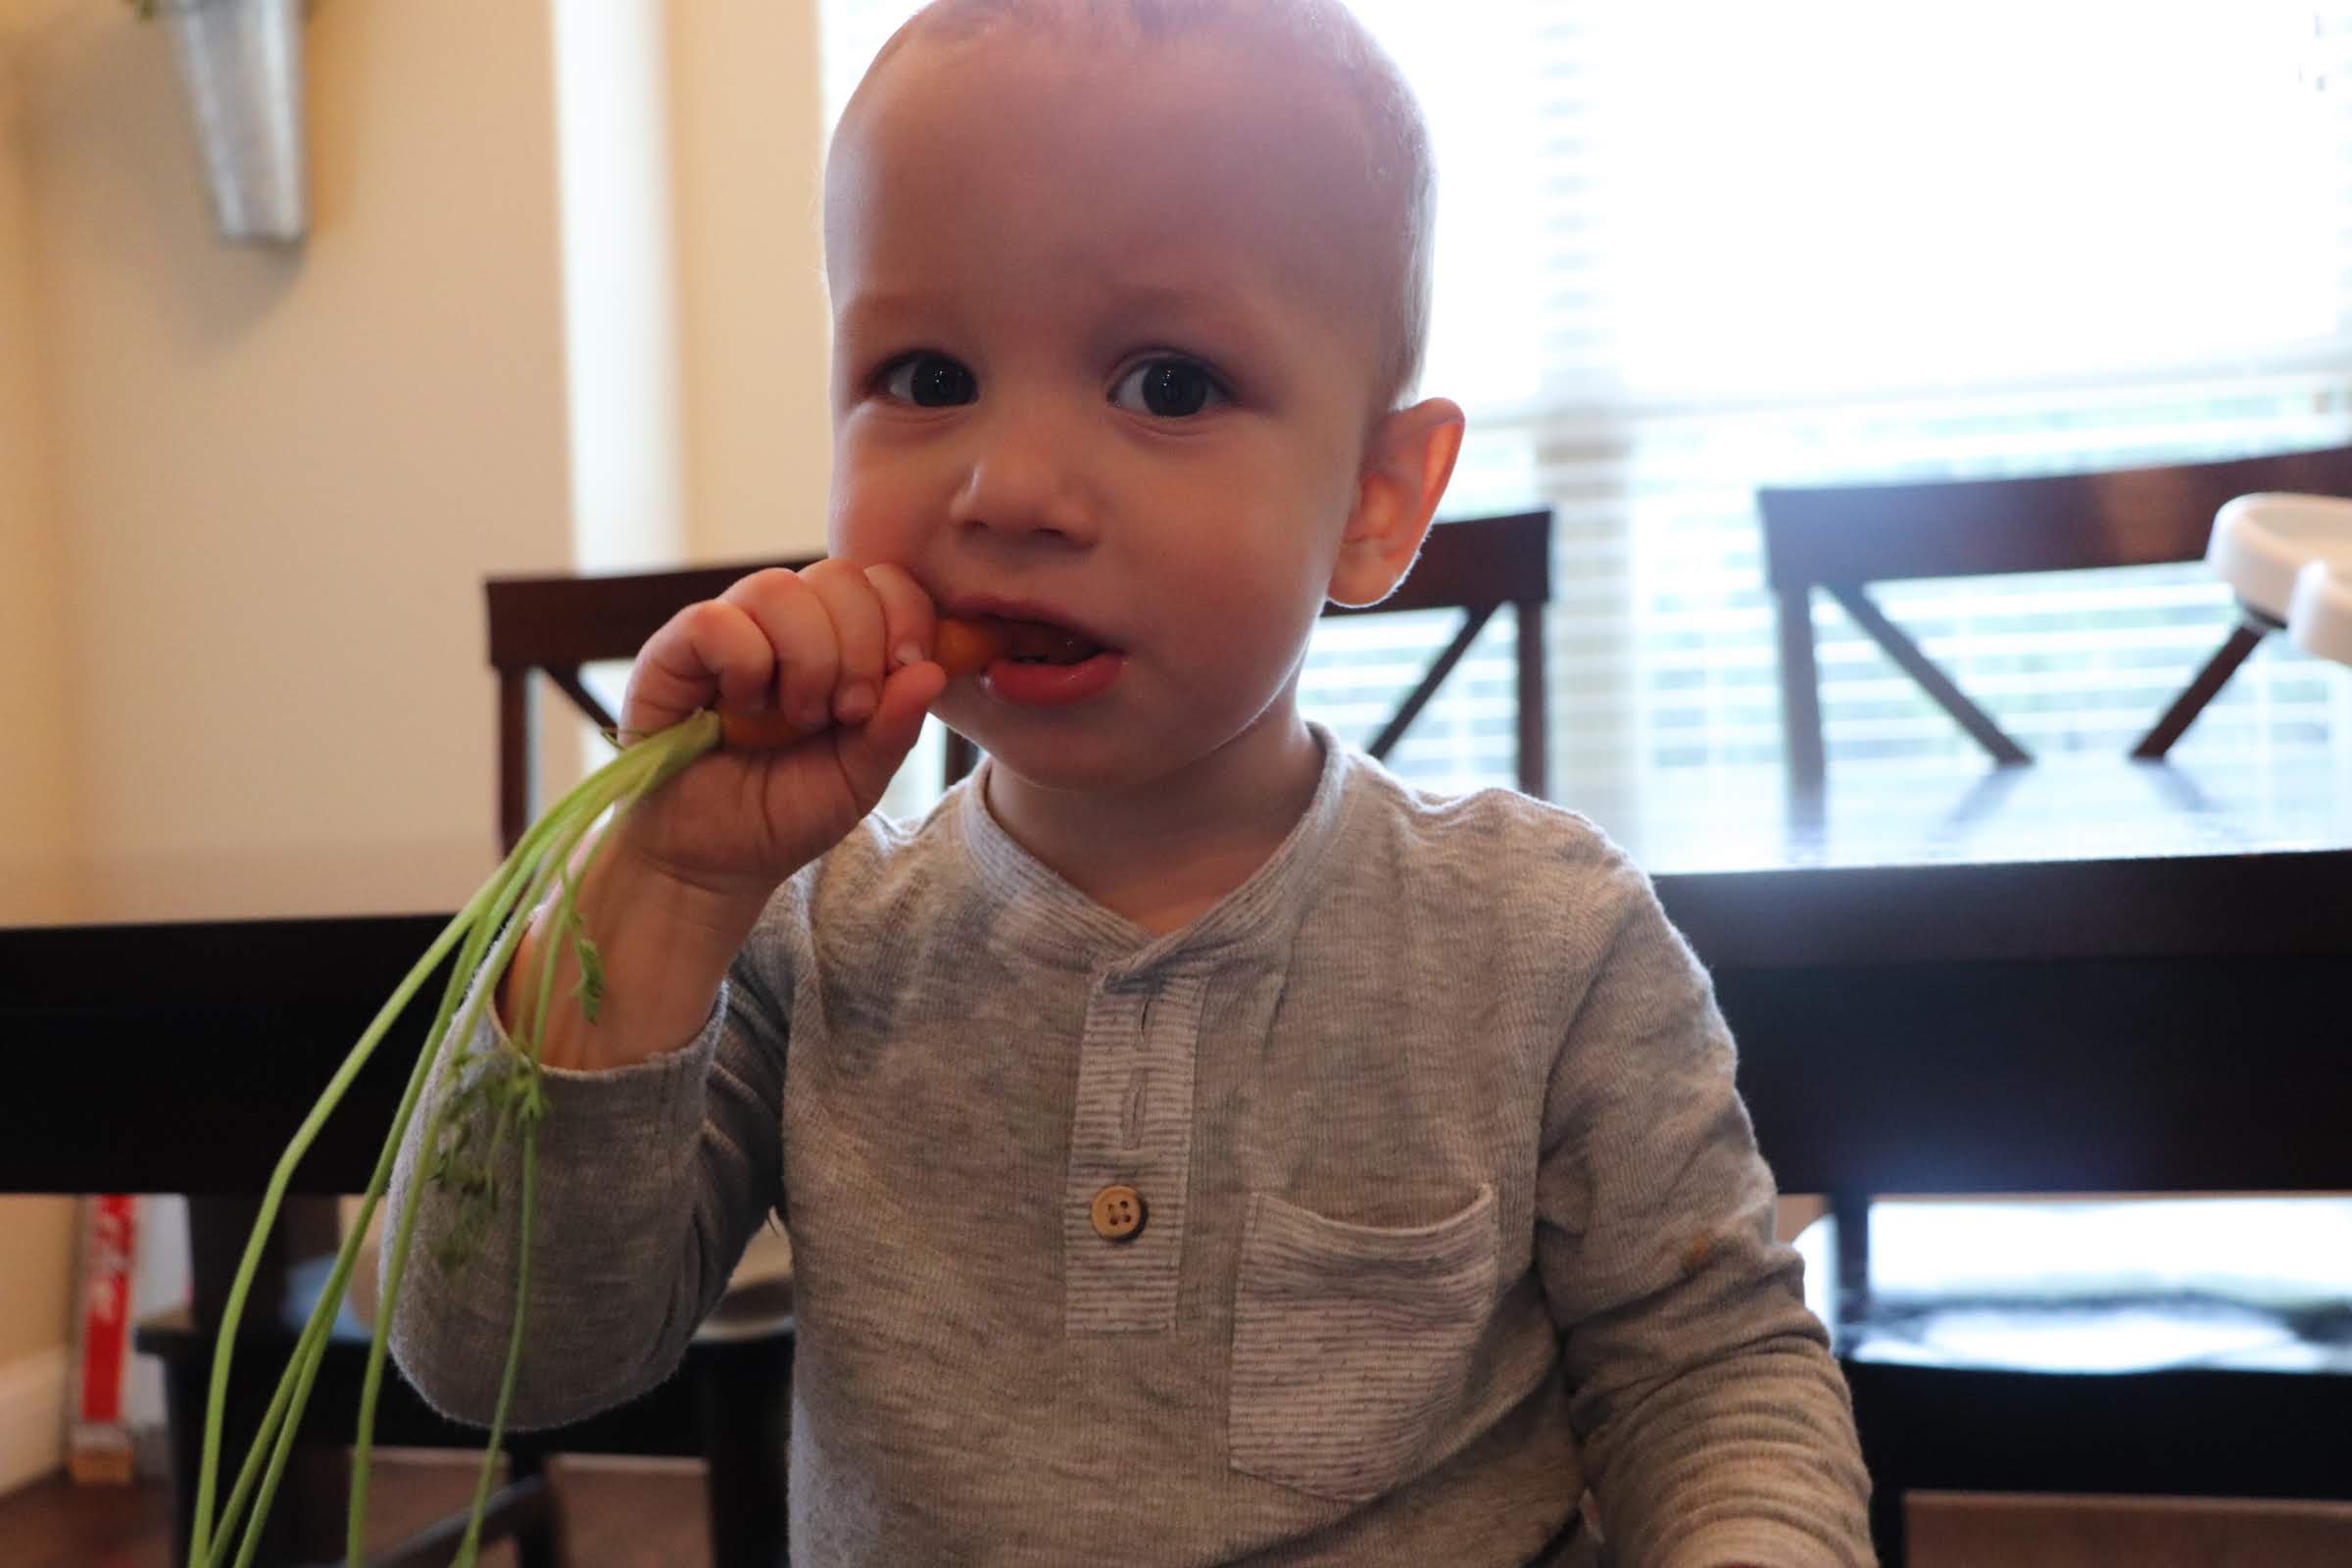 How to Start Baby Led Weaning